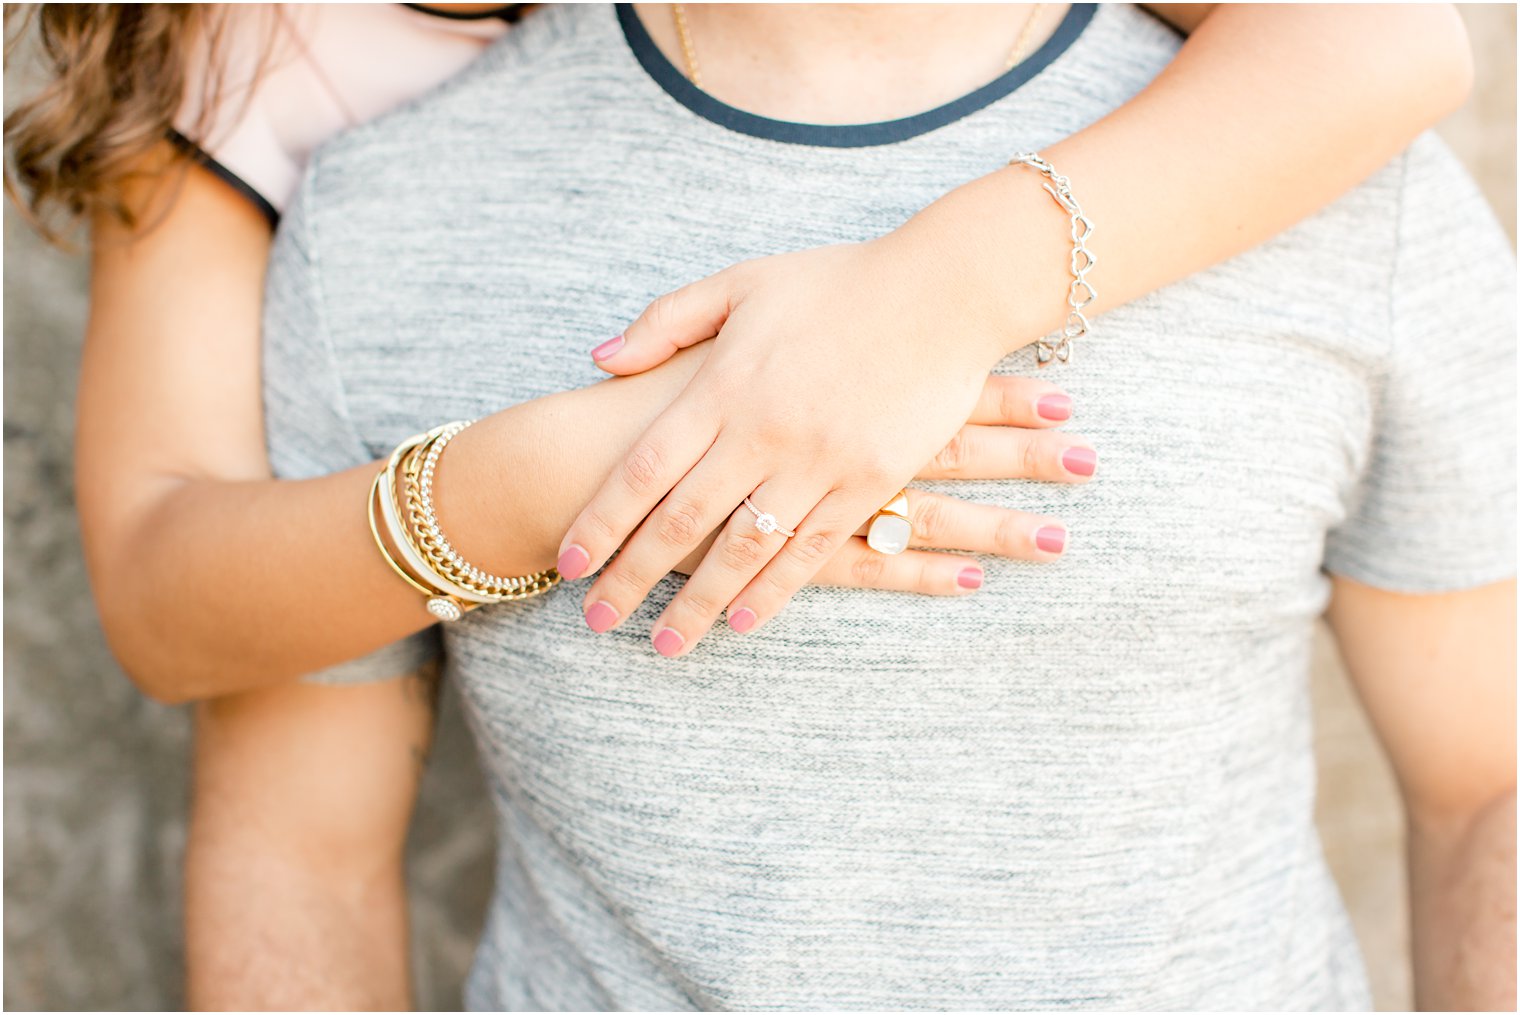 Solitaire engagement ring at Cape May engagement session | Photos by Idalia Photography